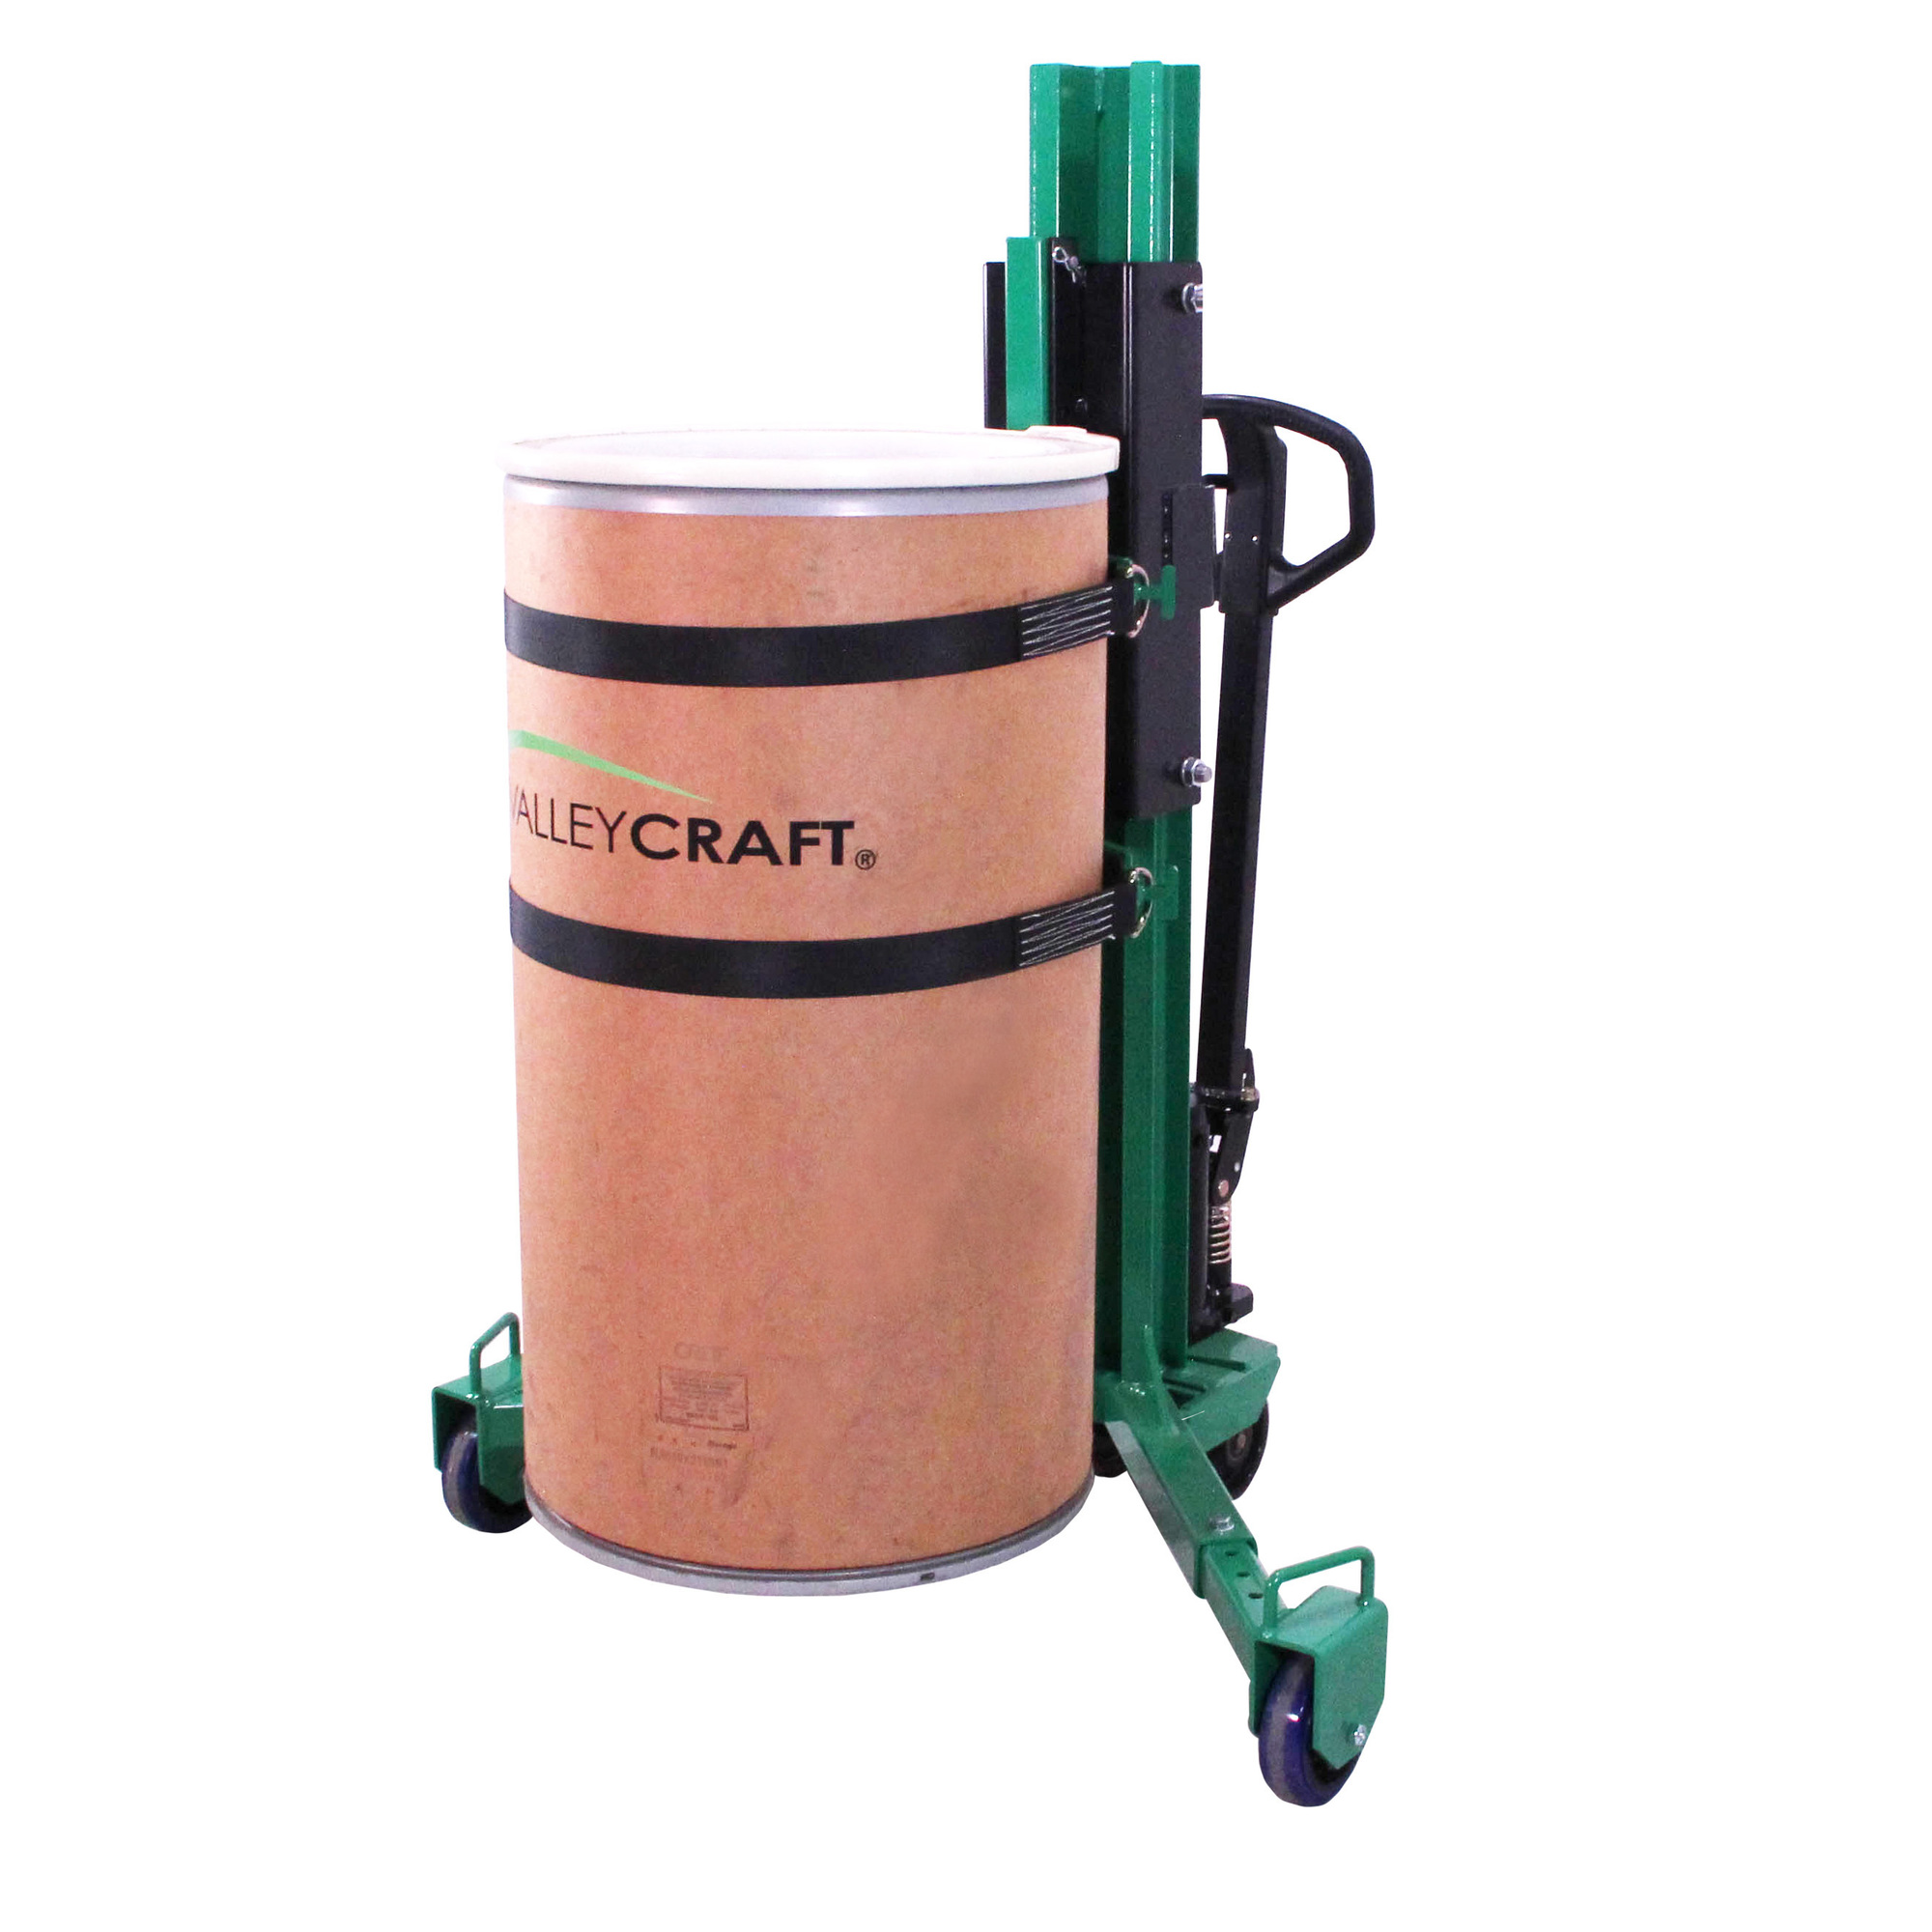 Valley Craft, Drum Lift Transporter, Deluxe, Capacity 800 lb, Material Steel, Drum Size 30 and 55, Model F89264